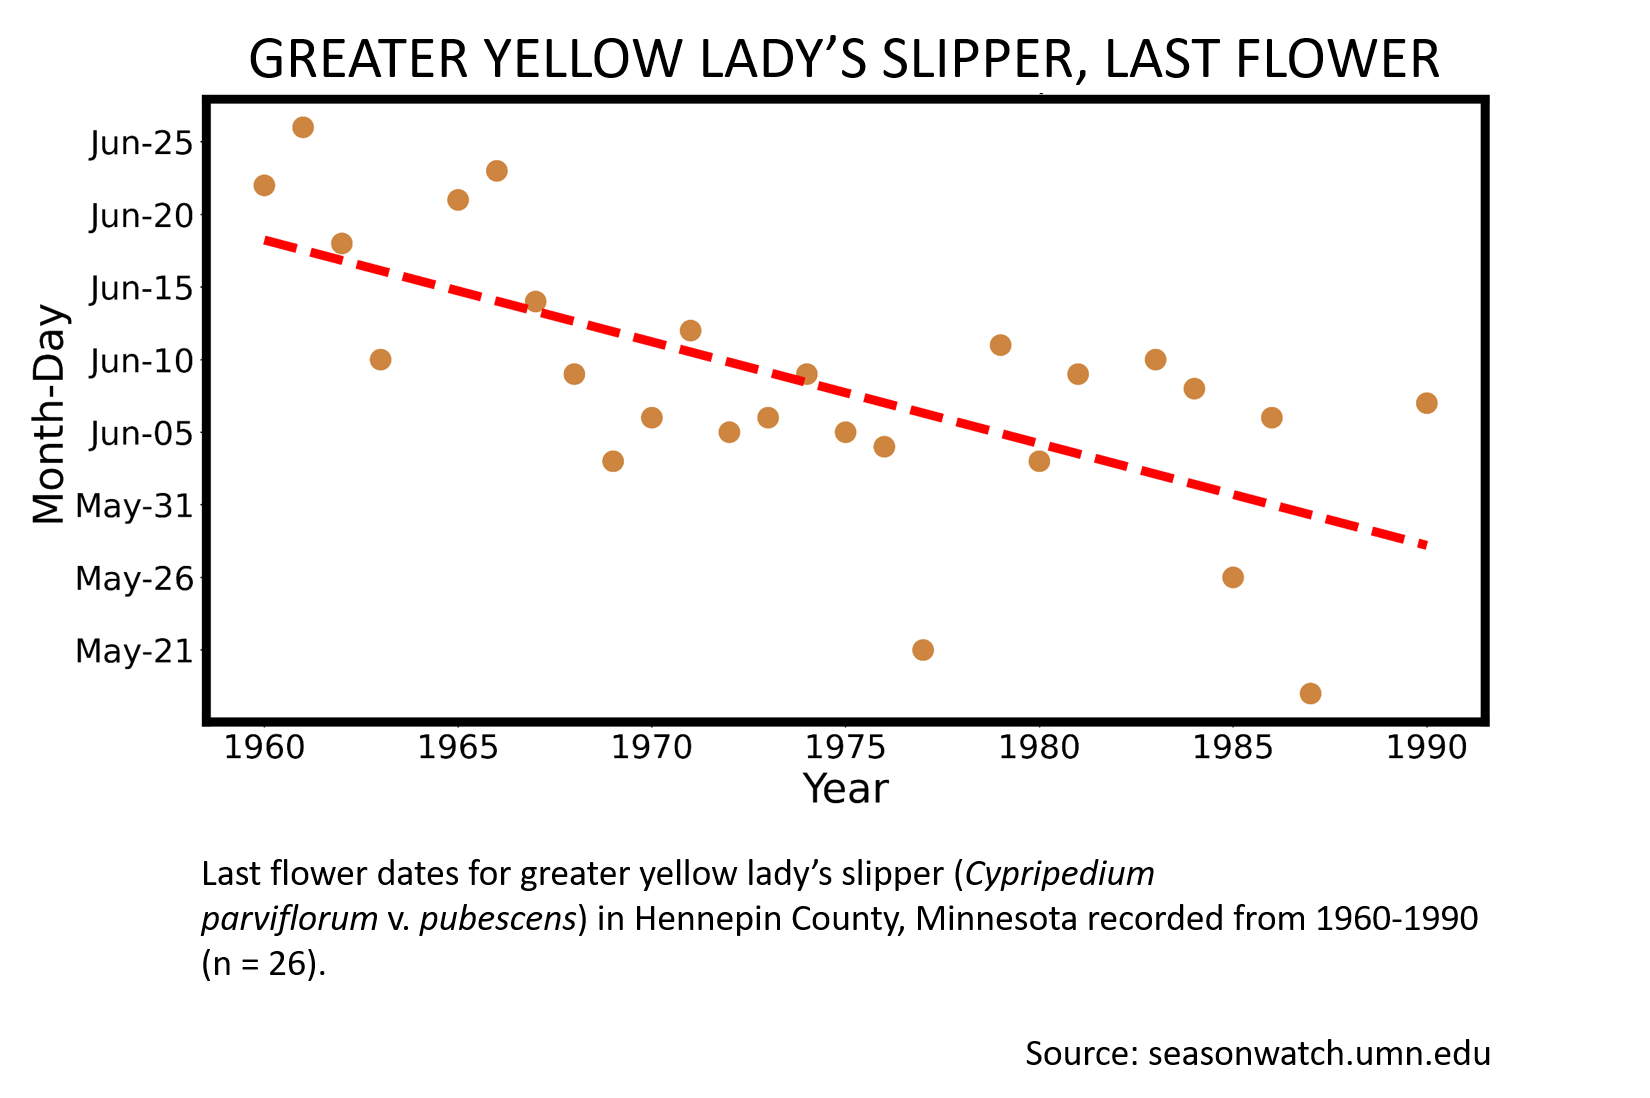 Scatterplot showing greater yellow lady's slipper phenology observations in Hennepin County, Minnesota